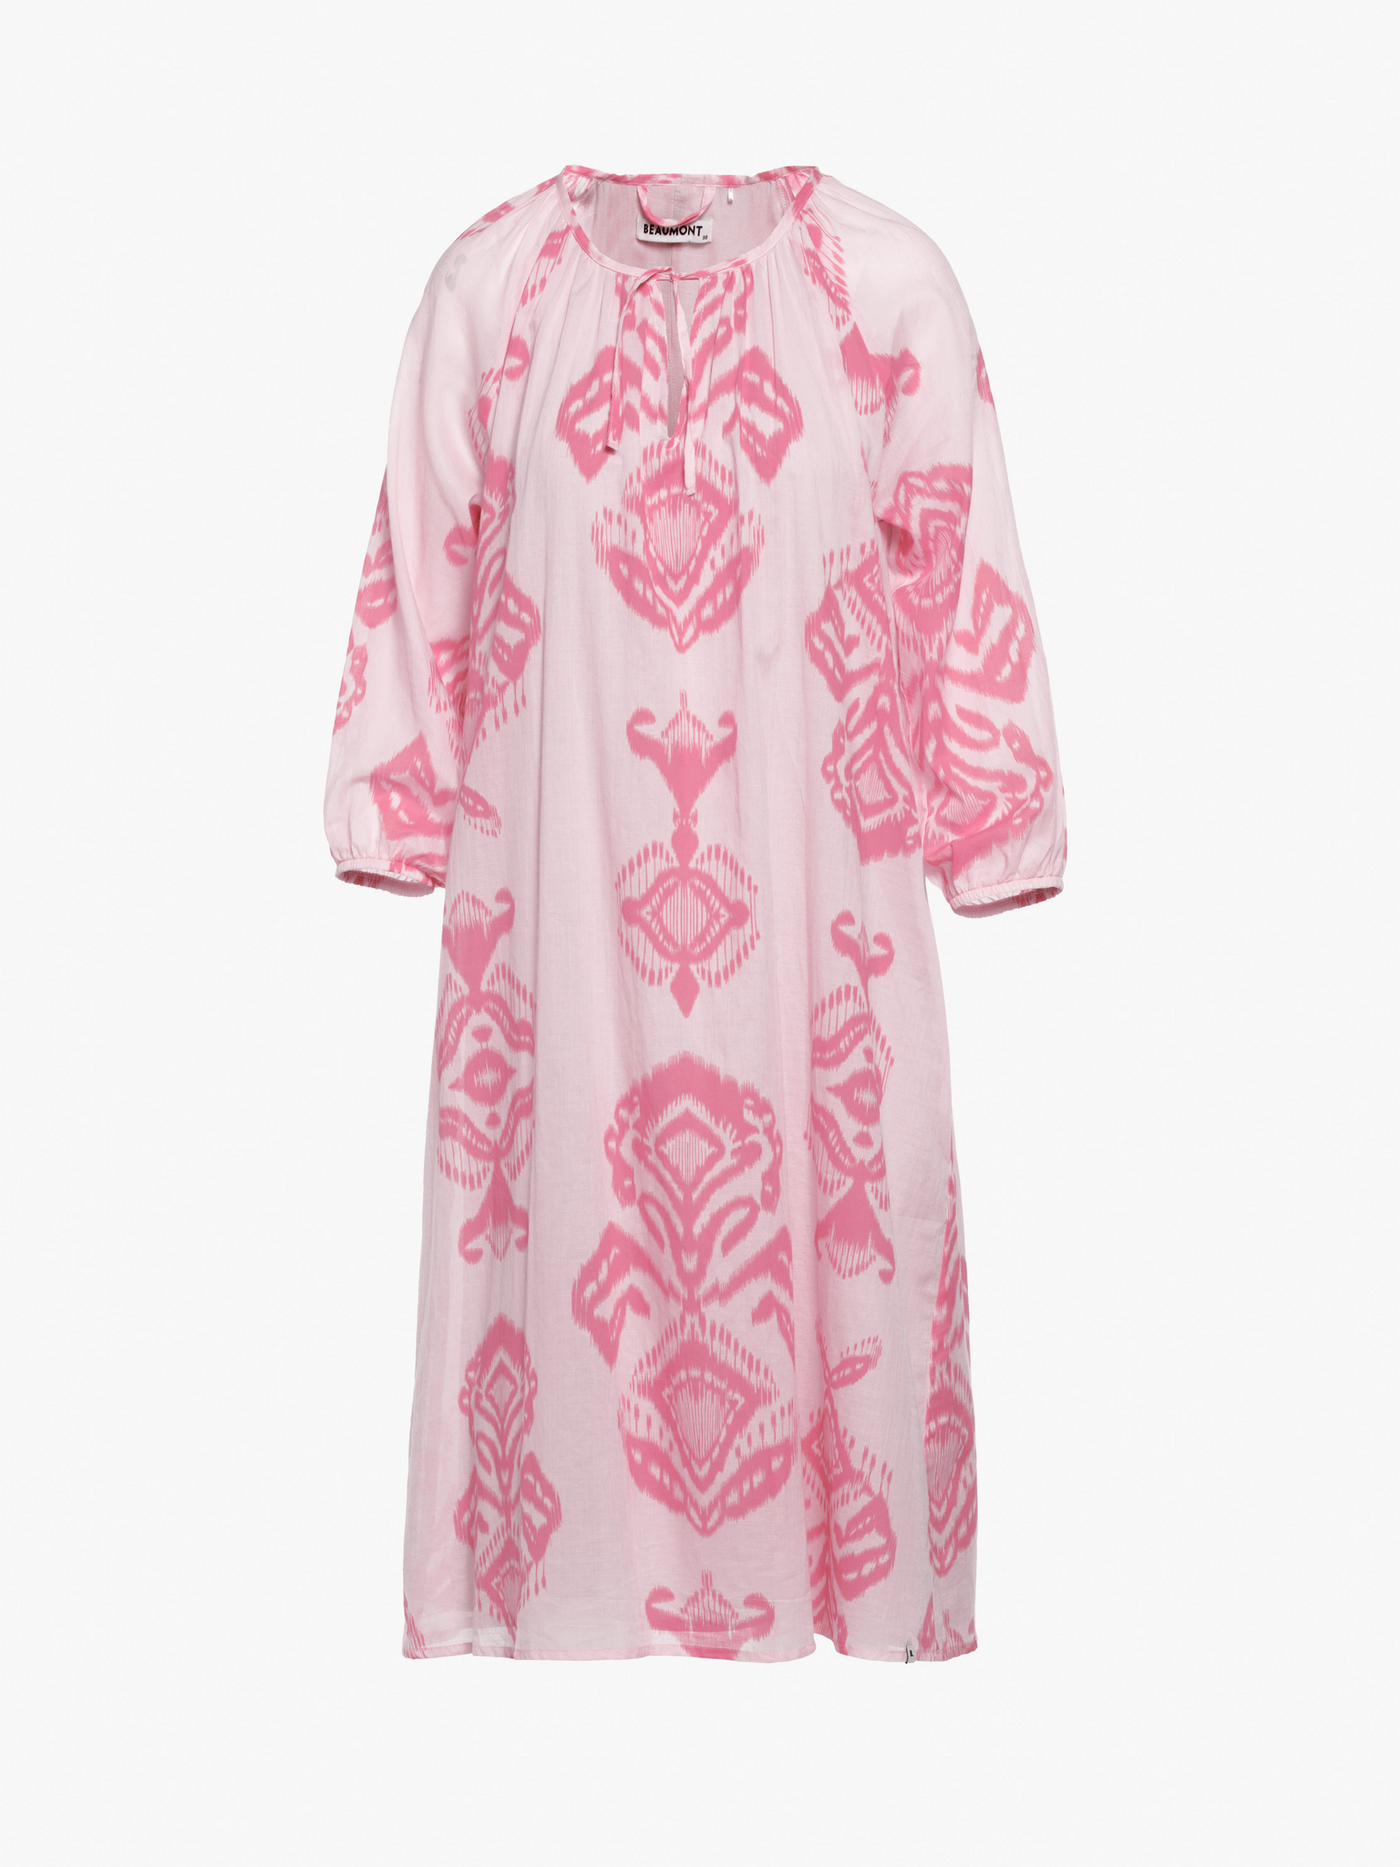 Beaumont Mary Printed Dress soft pink